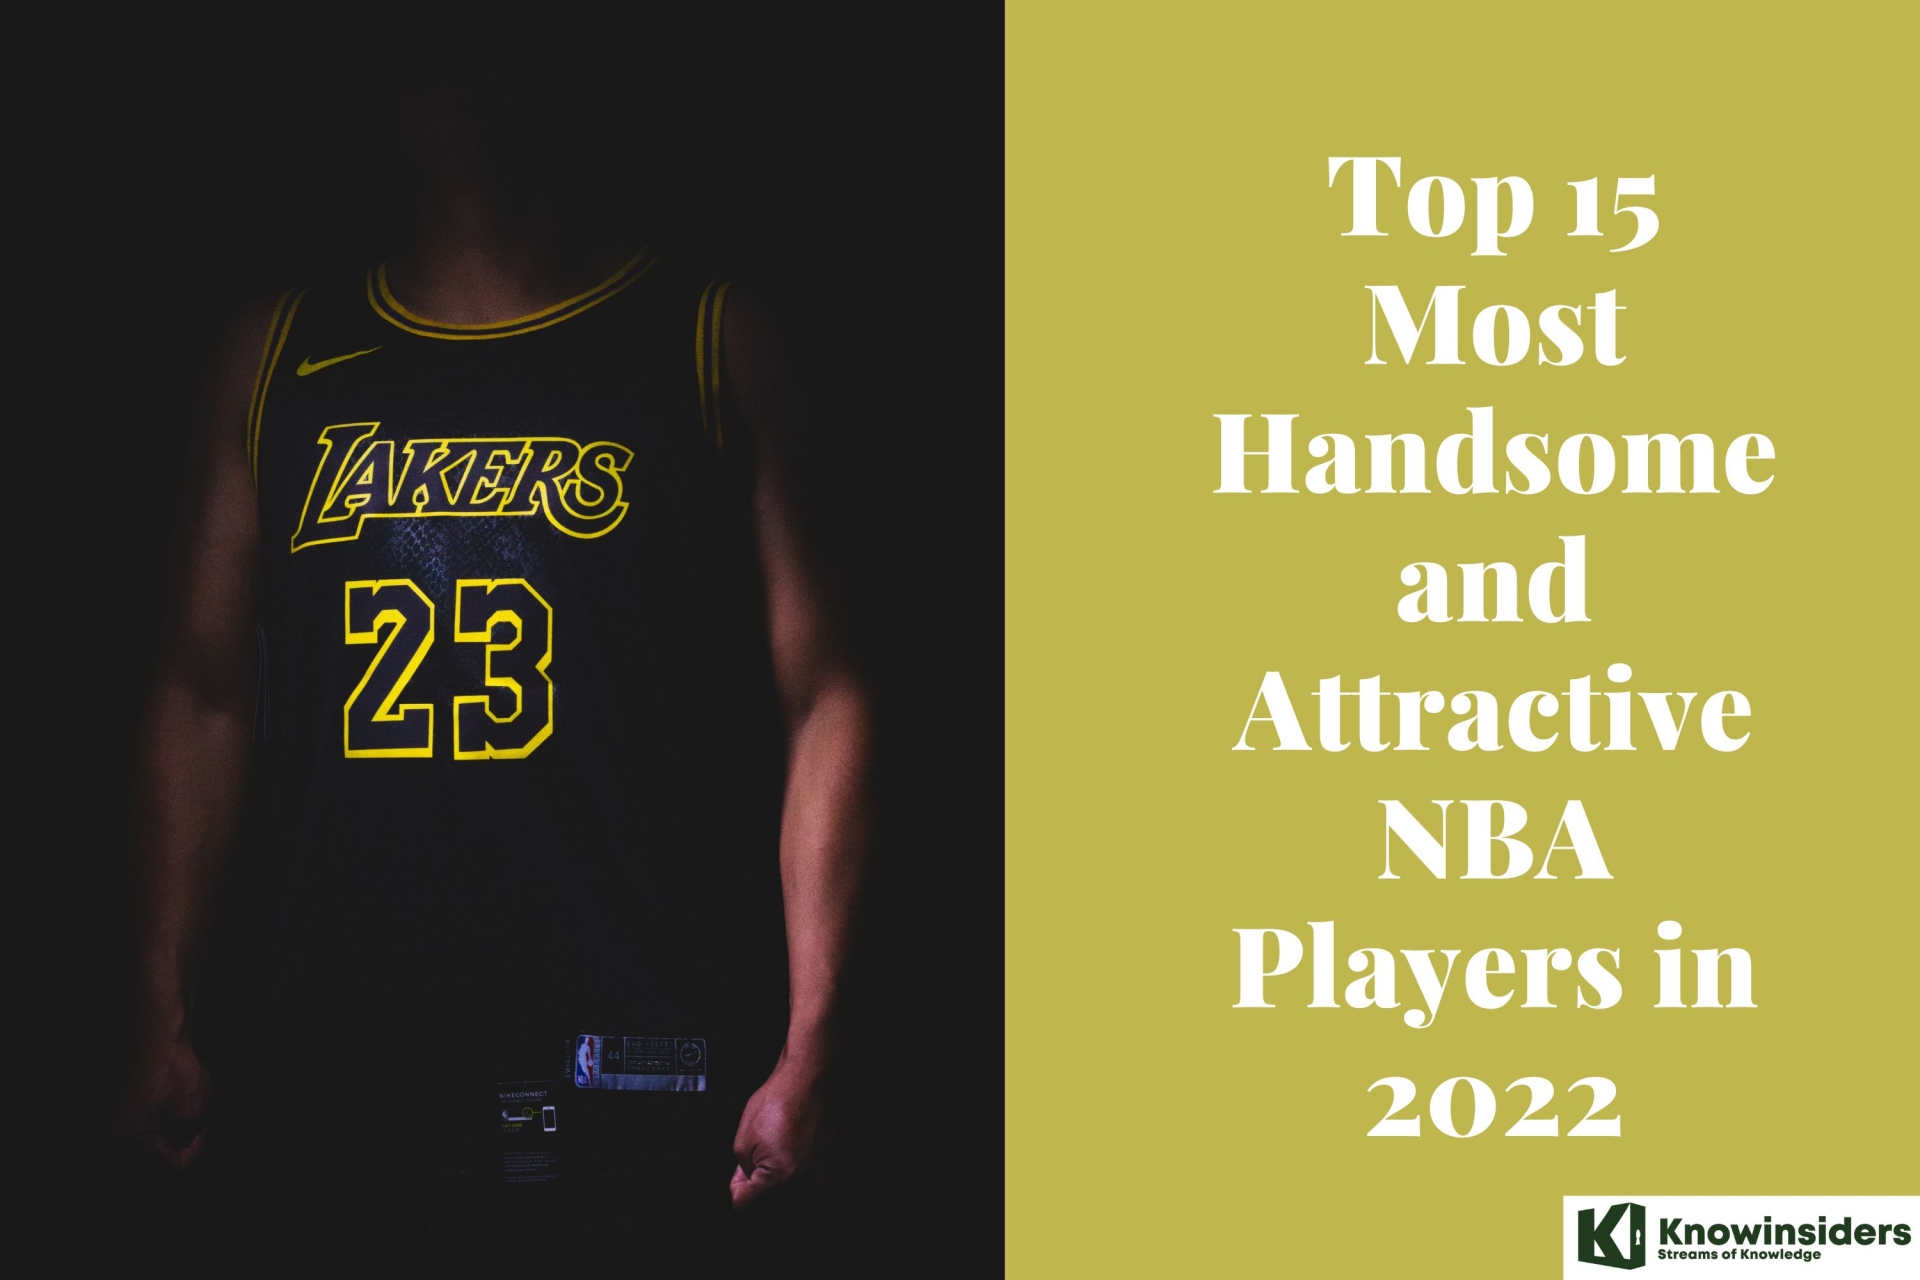 Top 15 Most Handsome and Attractive NBA Players in 2022